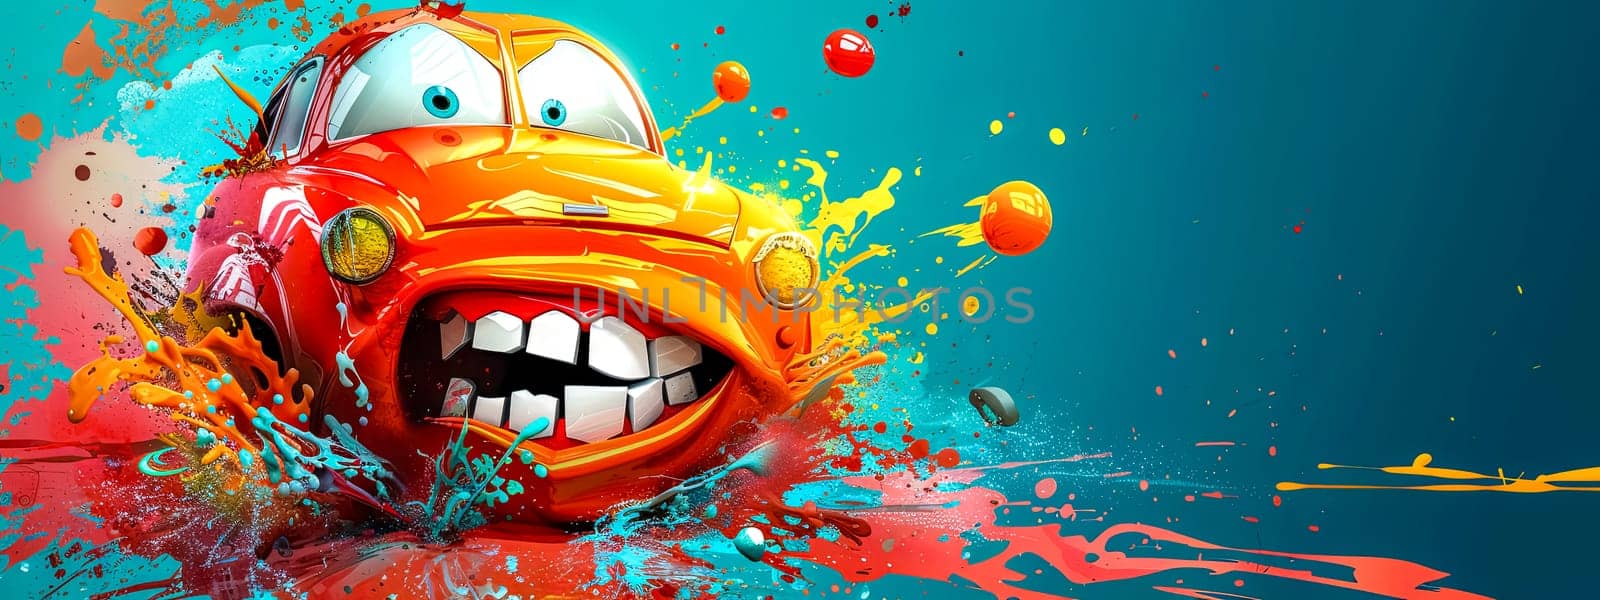 Animated Car Character Splashing in Colorful Paint by Edophoto